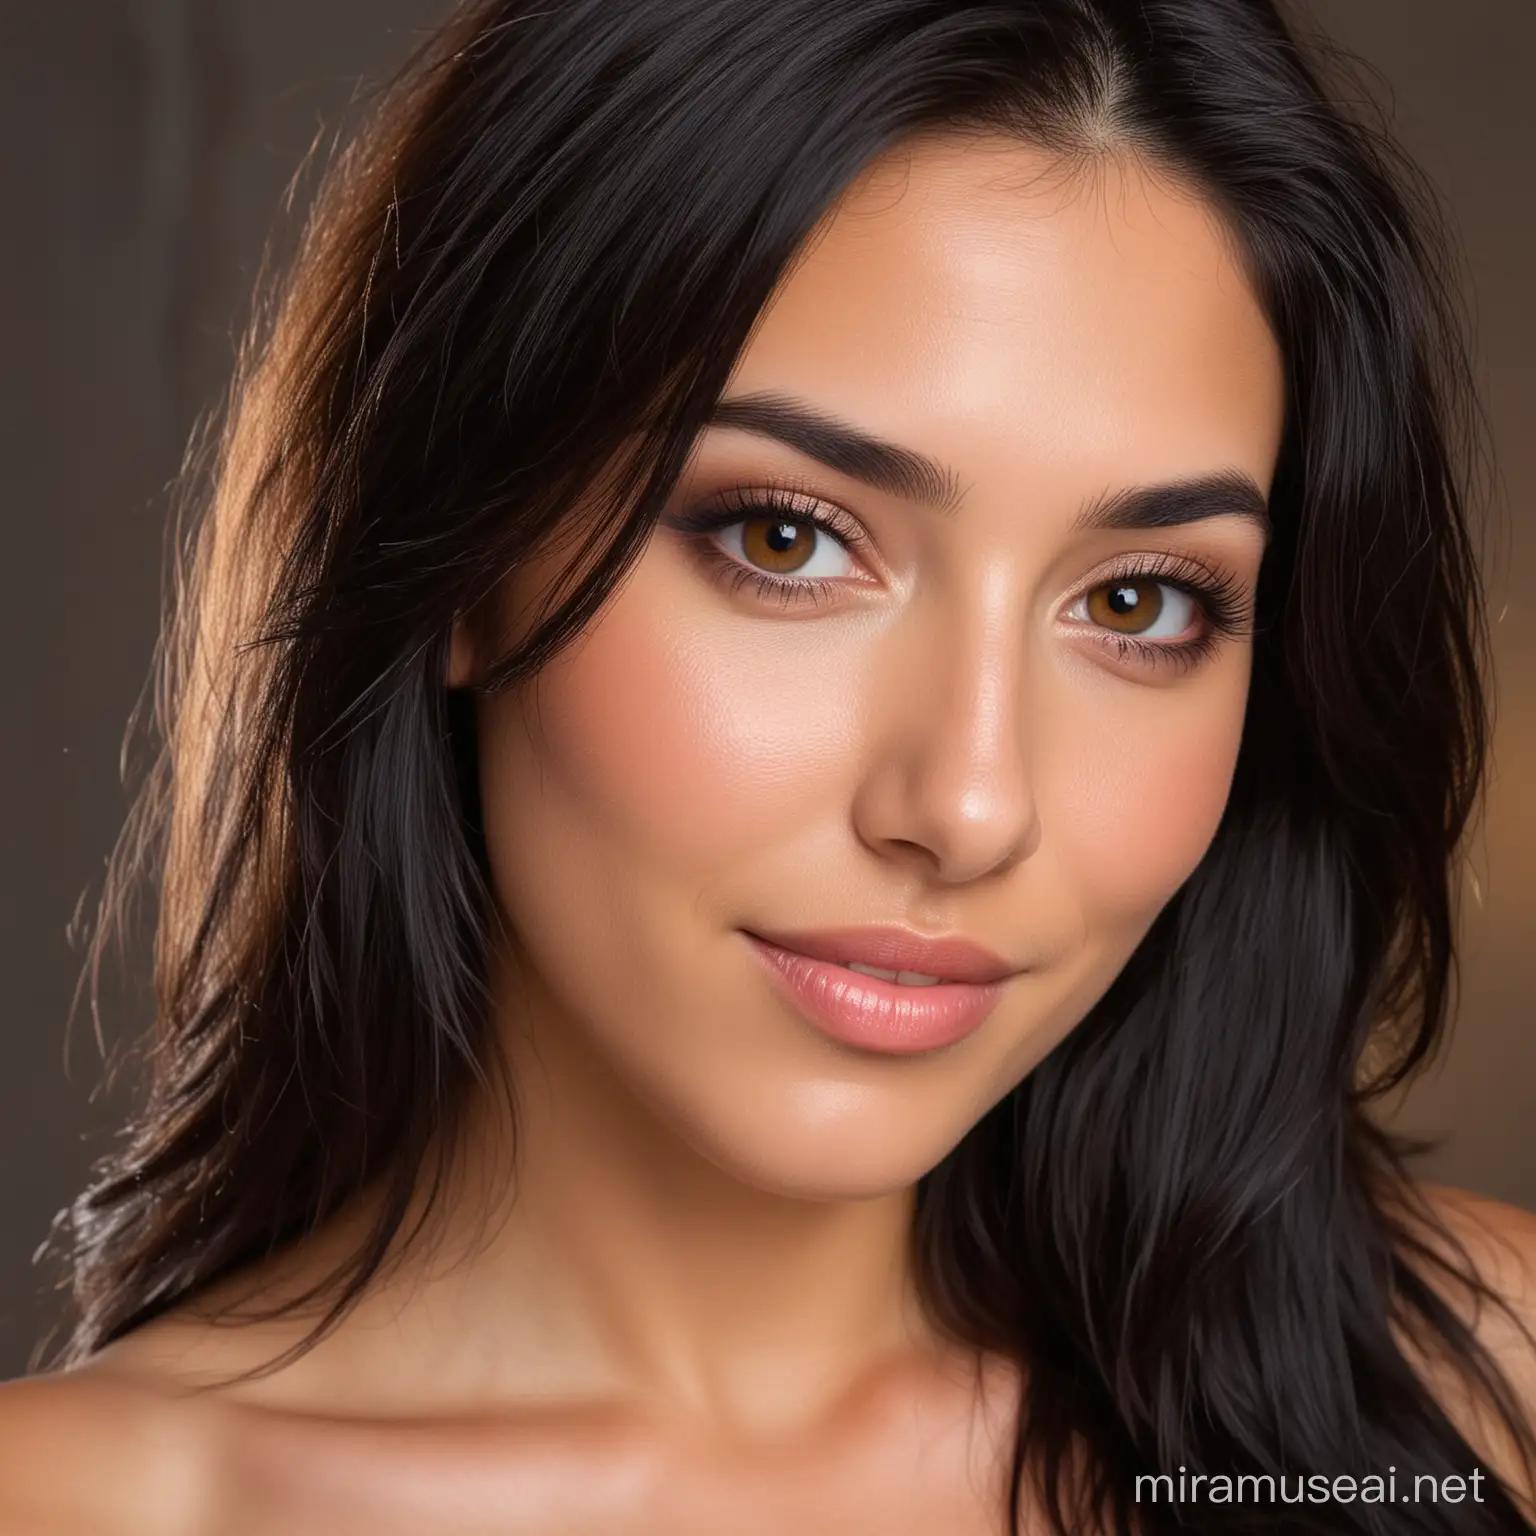 Jolene is beautiful, 25 years old Mediterranean woman. Has long black hair below her shoulders. A beauty spot on each cheek. Brown eyes. Likes to smile and has a mischievous look. She likes night stars.  